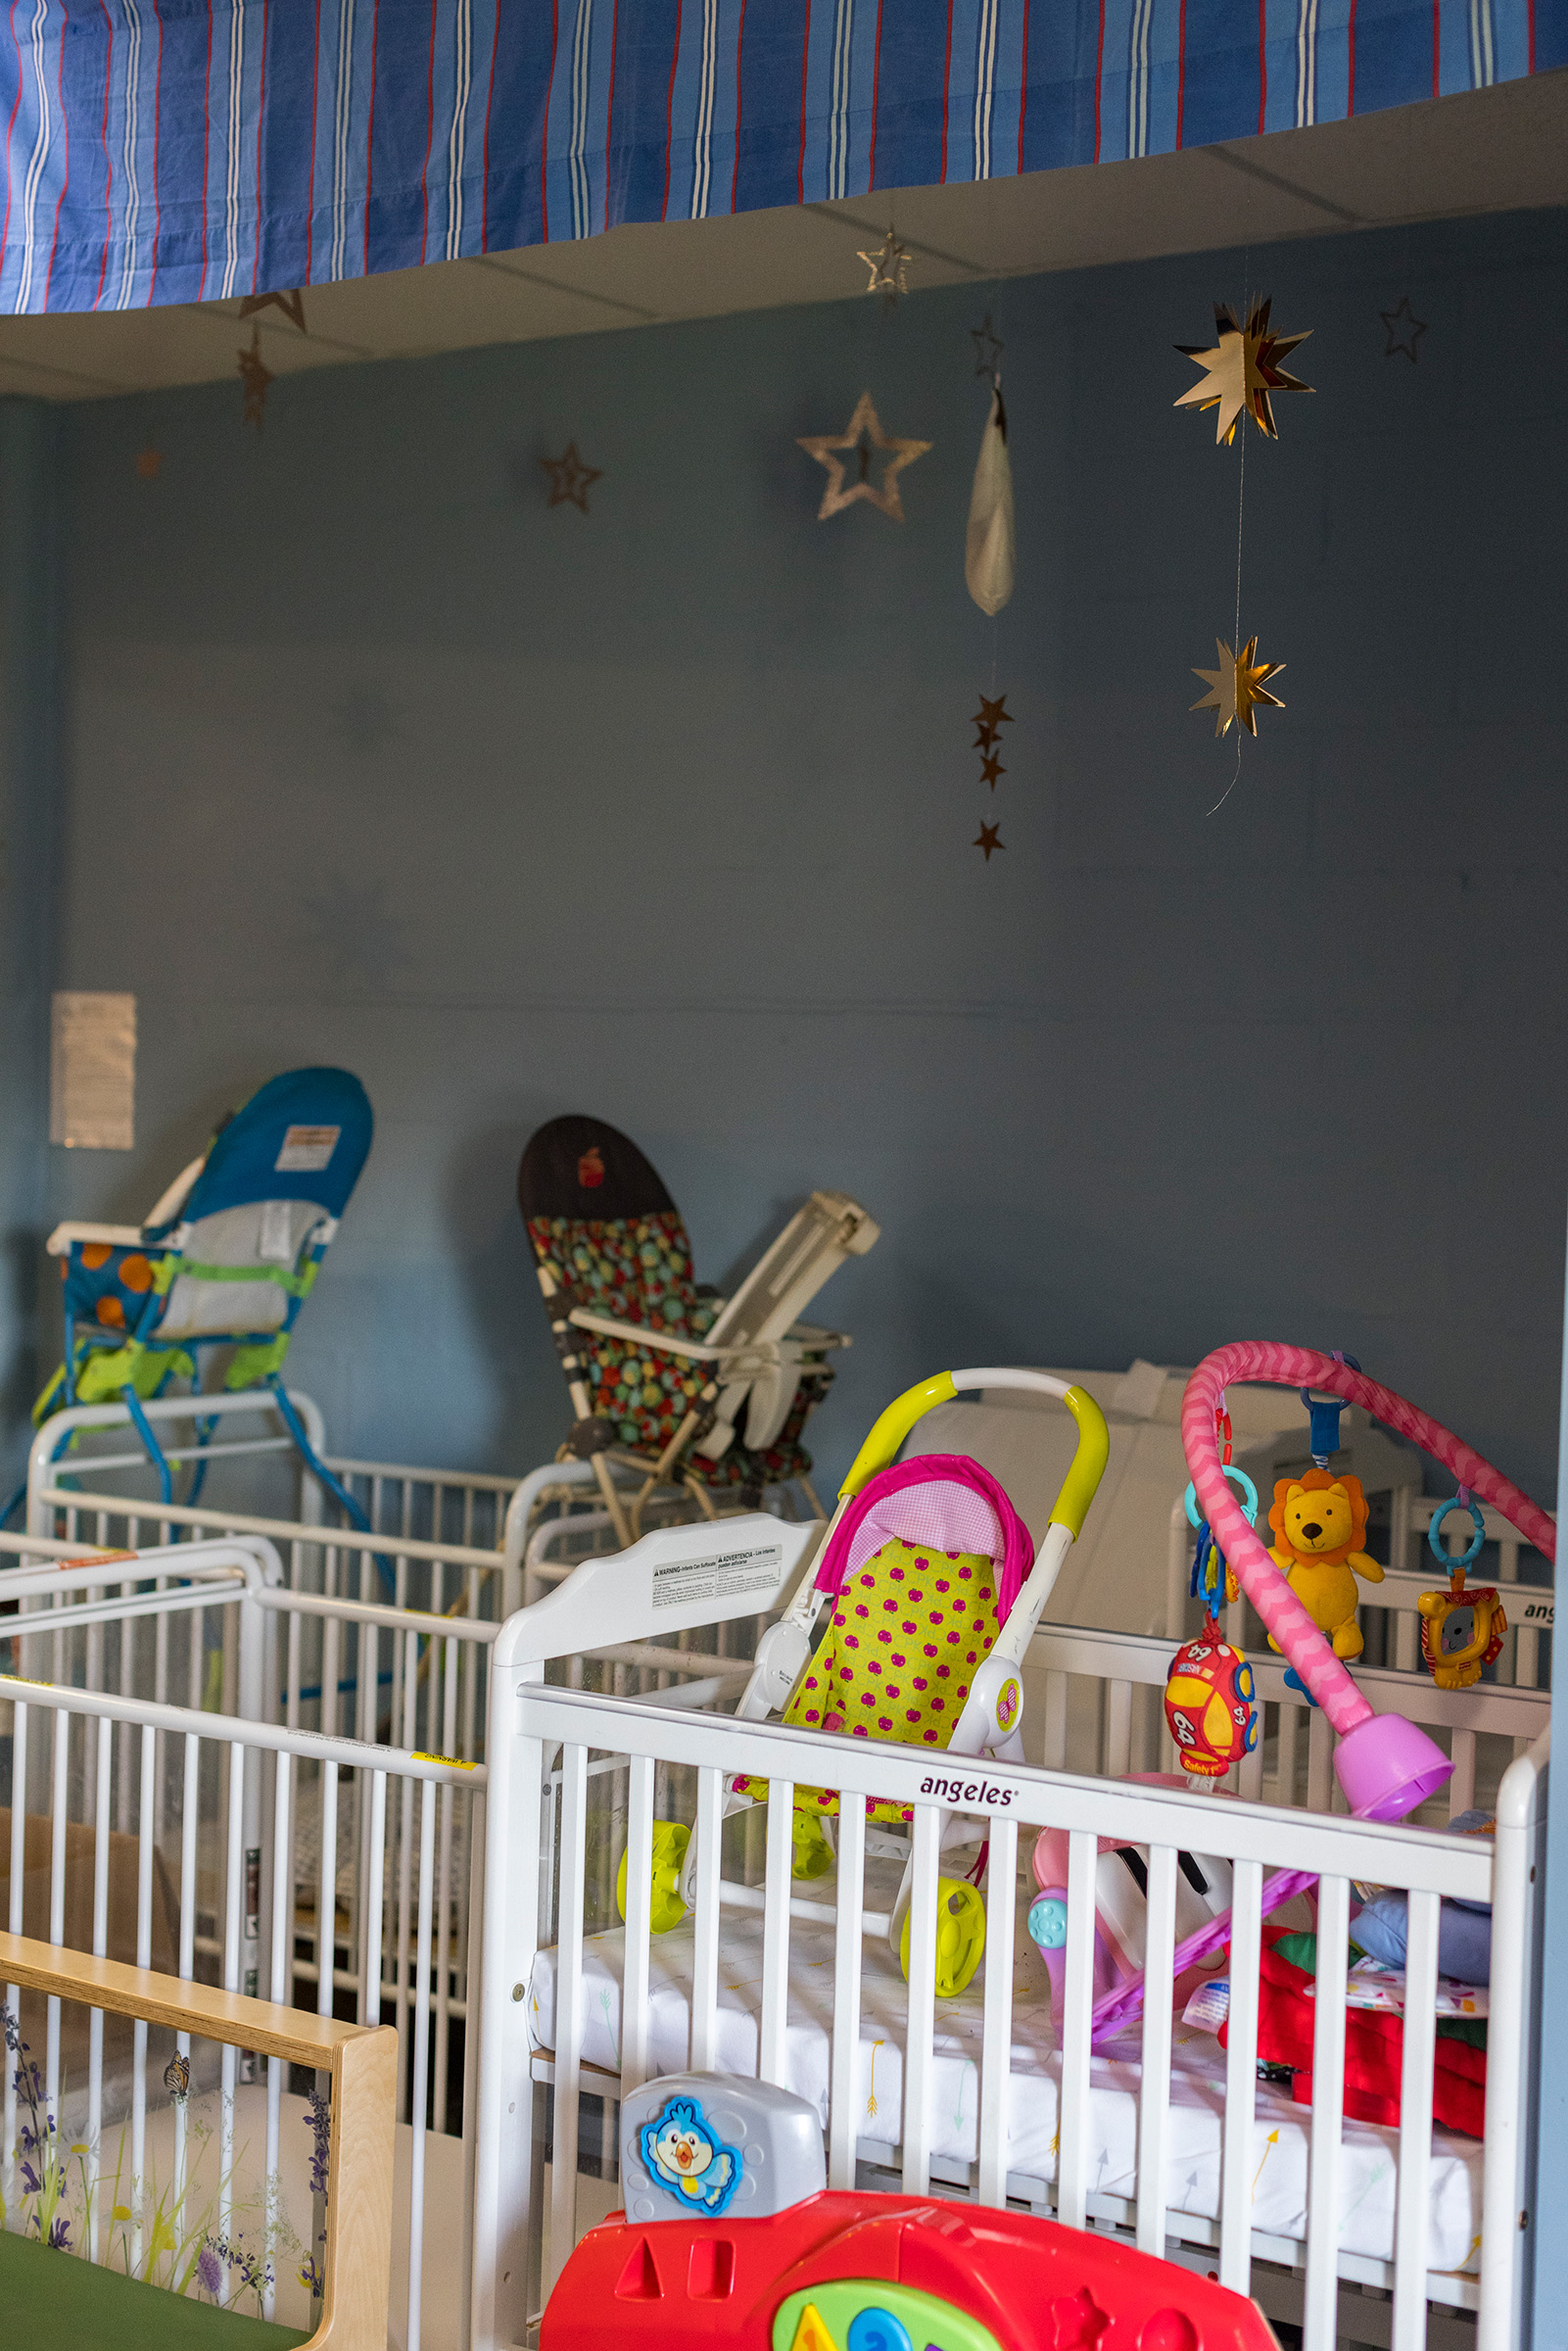 The daycare is still filled with colorful toys and star mobiles dangling above cribs, but most classrooms are now empty of children.